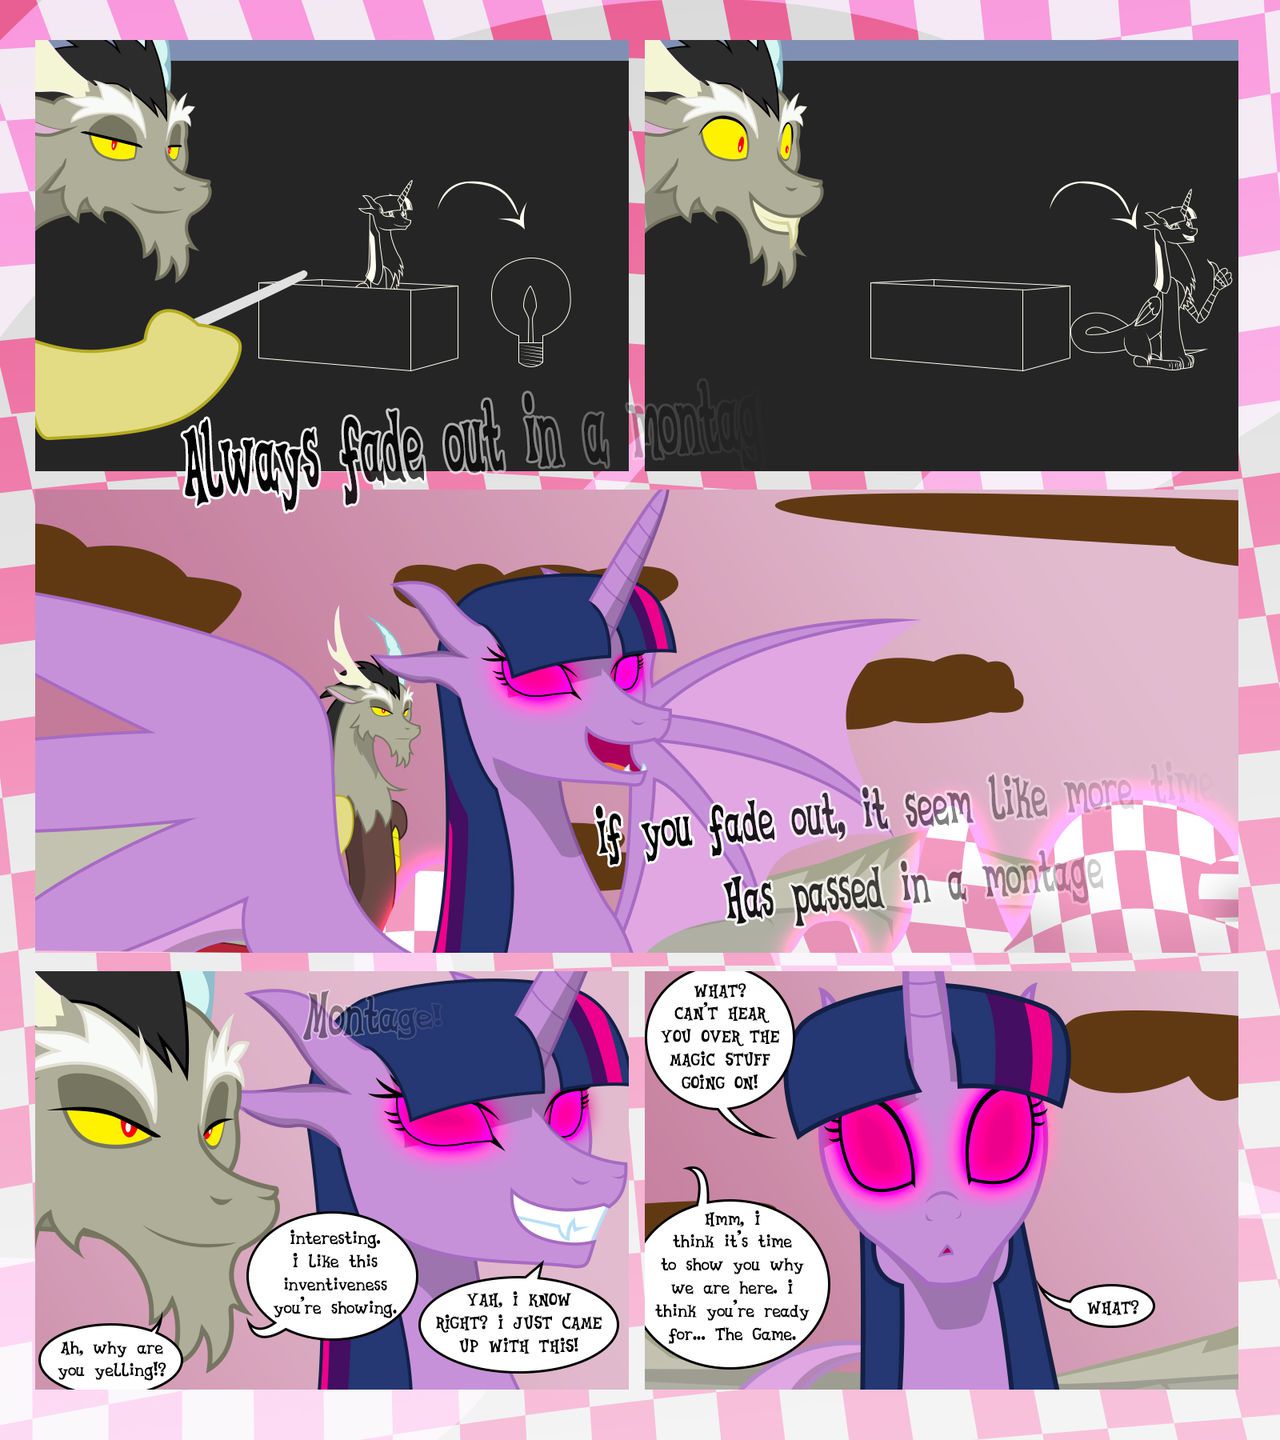 [GatesMcCloud] Cutie Mark Crusaders 10k: Chapter 3 - The Lost (My Little Pony: Friendship is Magic) [English] [Ongoing] 71